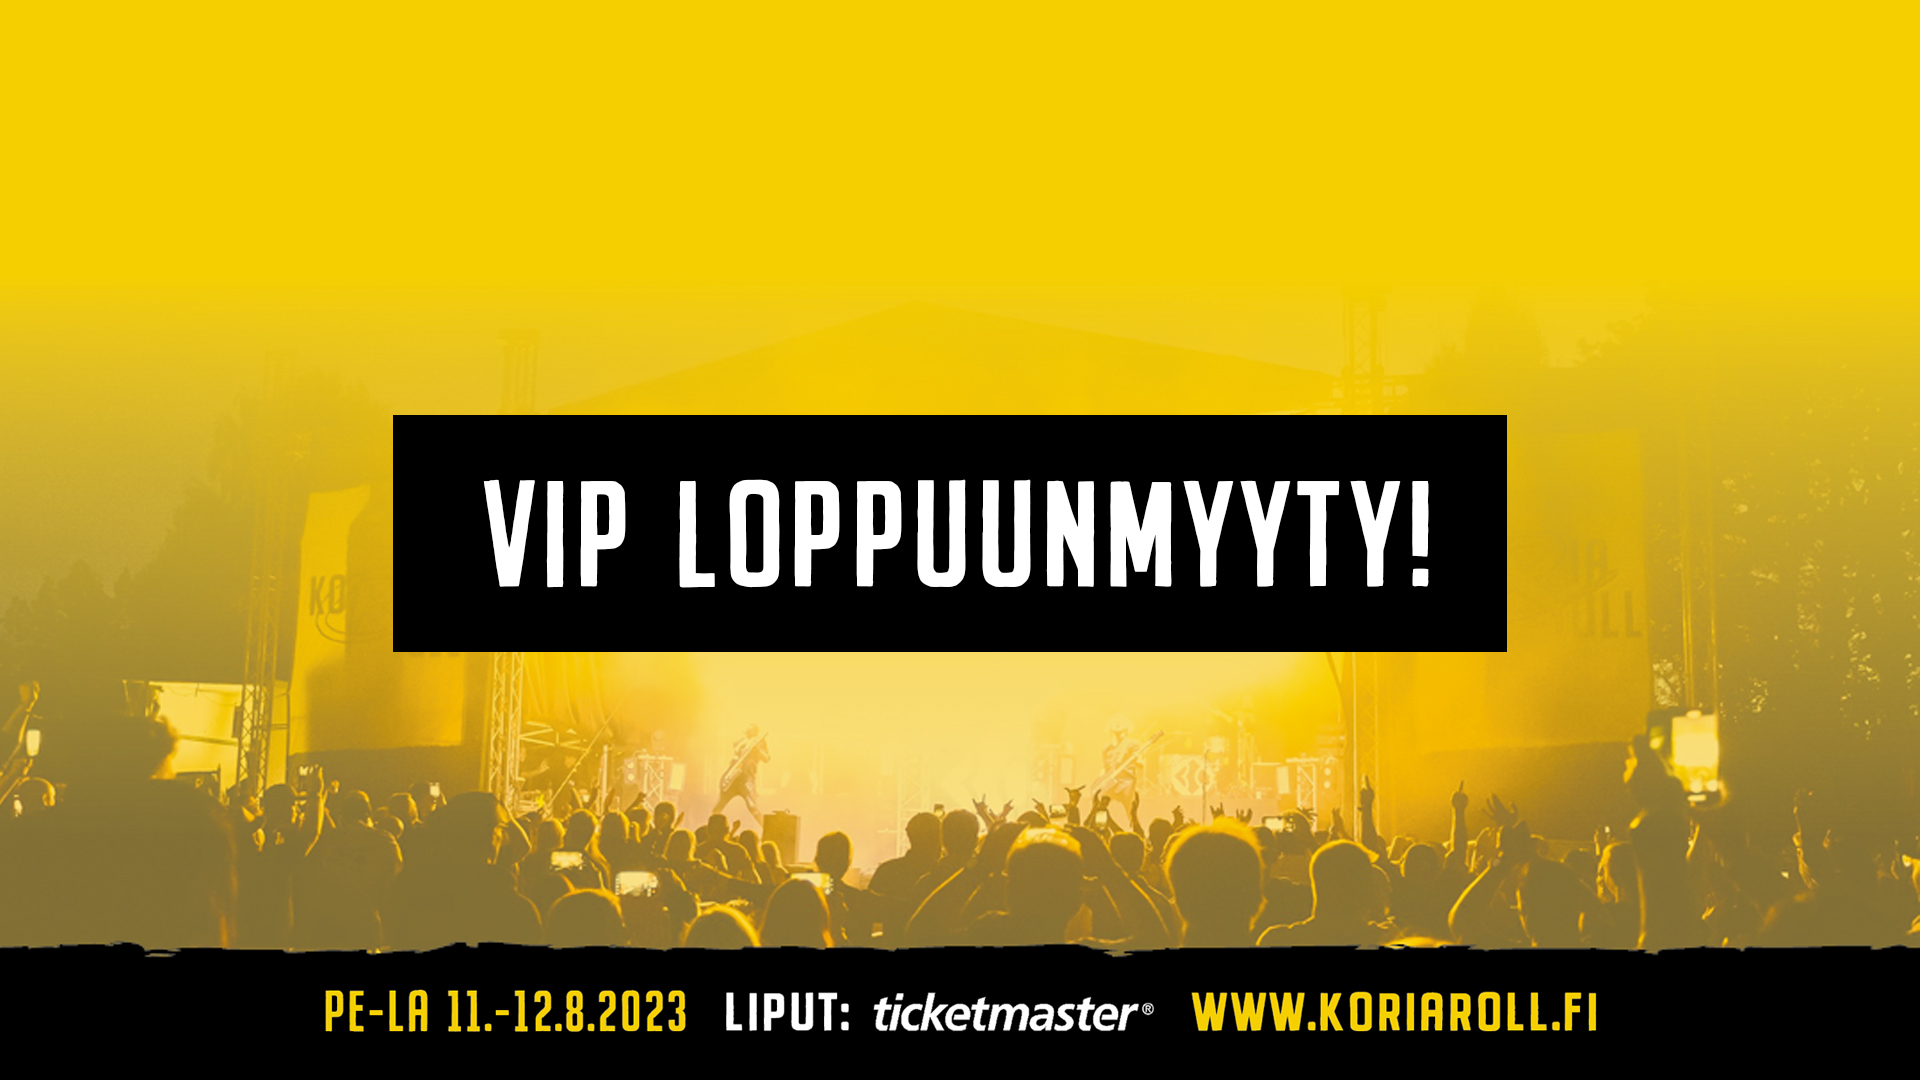 Featured image for “Koria Rollin VIP on loppuunmyyty!”